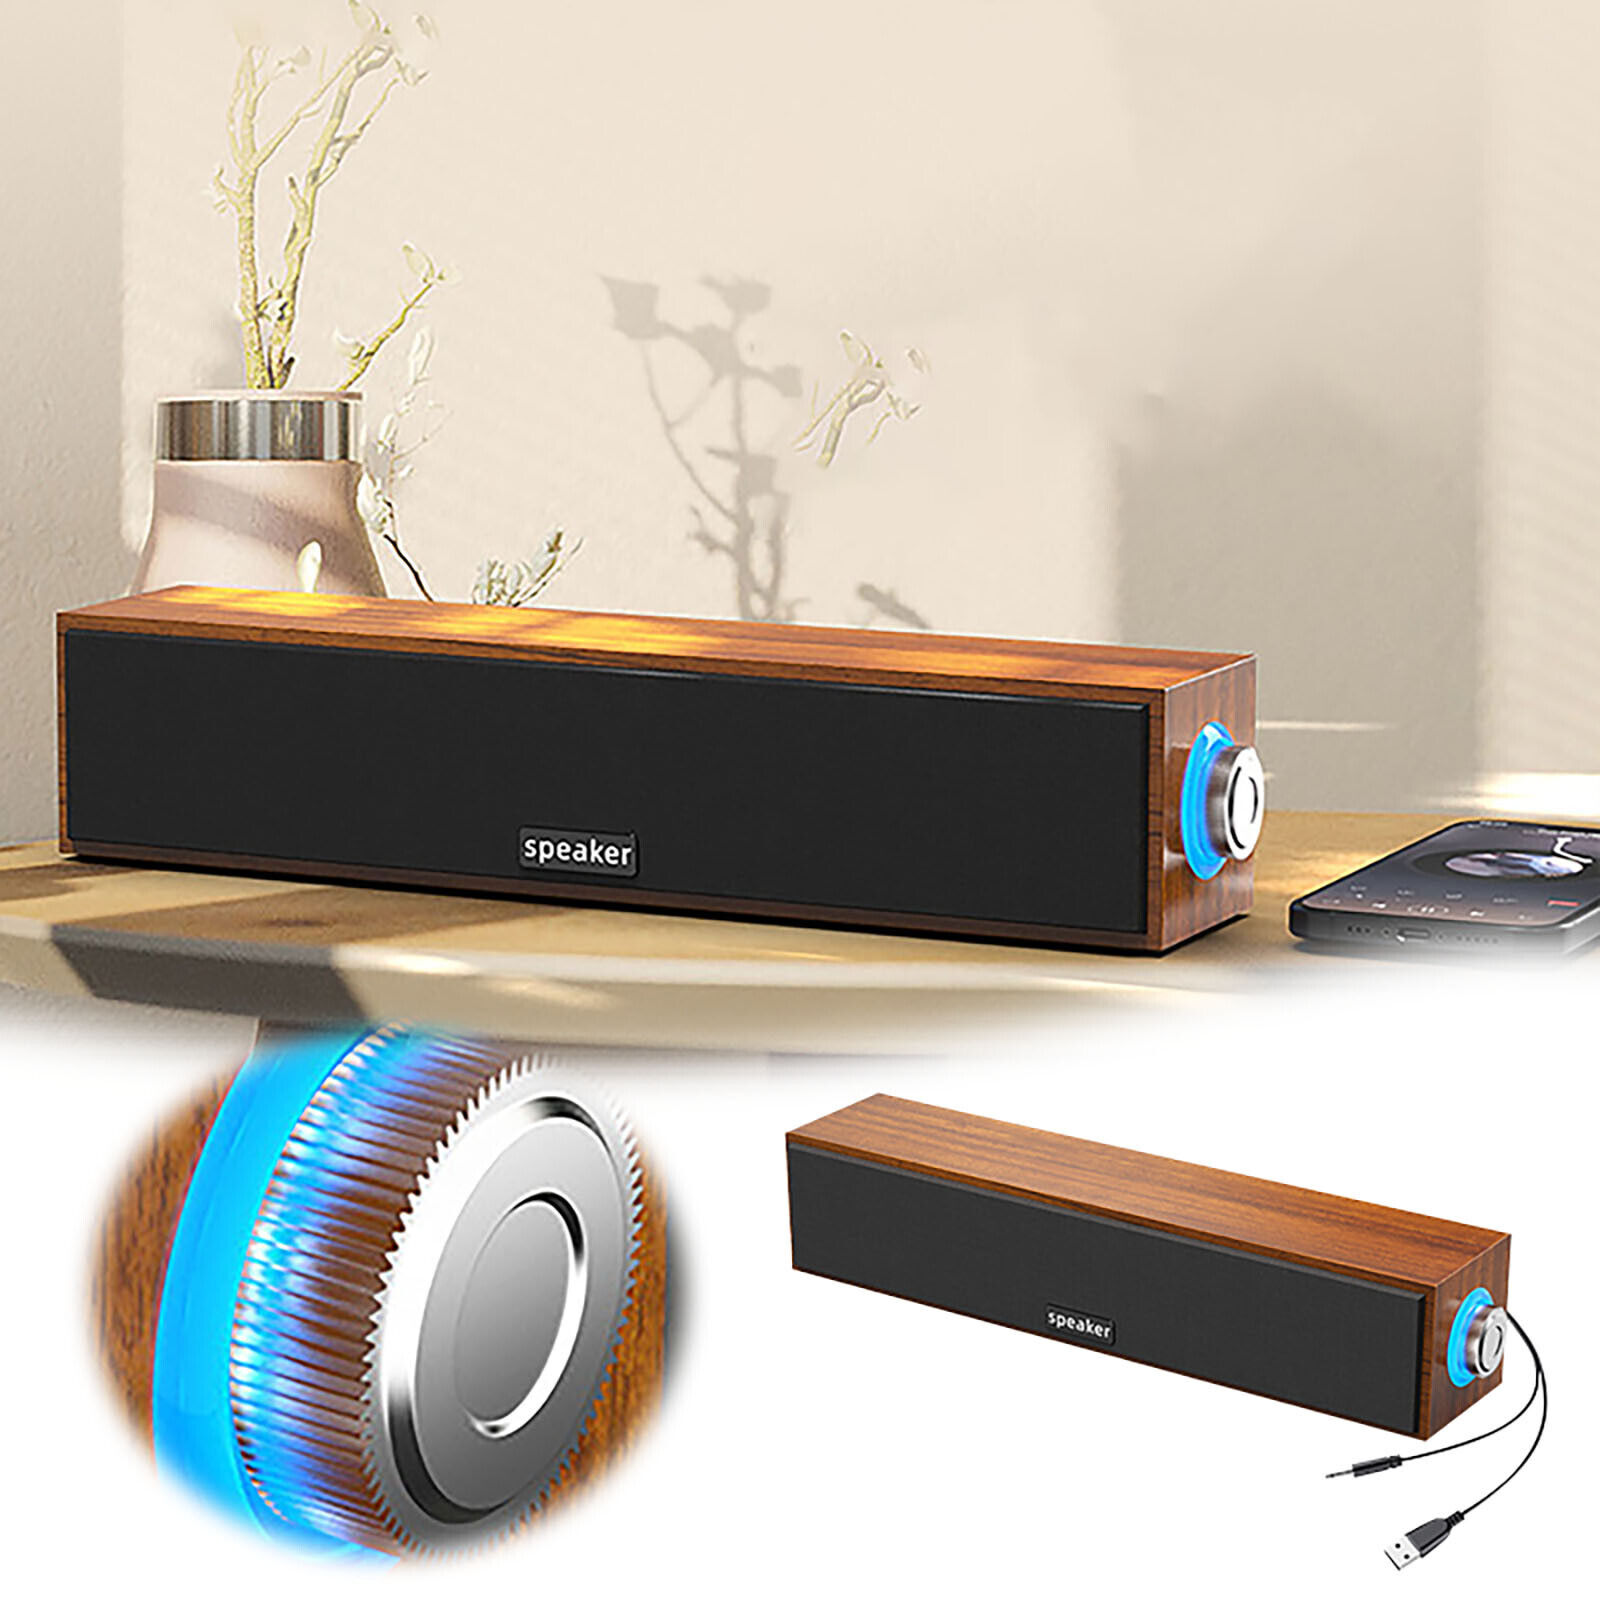 Desktop Retro Wooden Speaker With Speakers And Heavy Bass 4D Surround Stereo